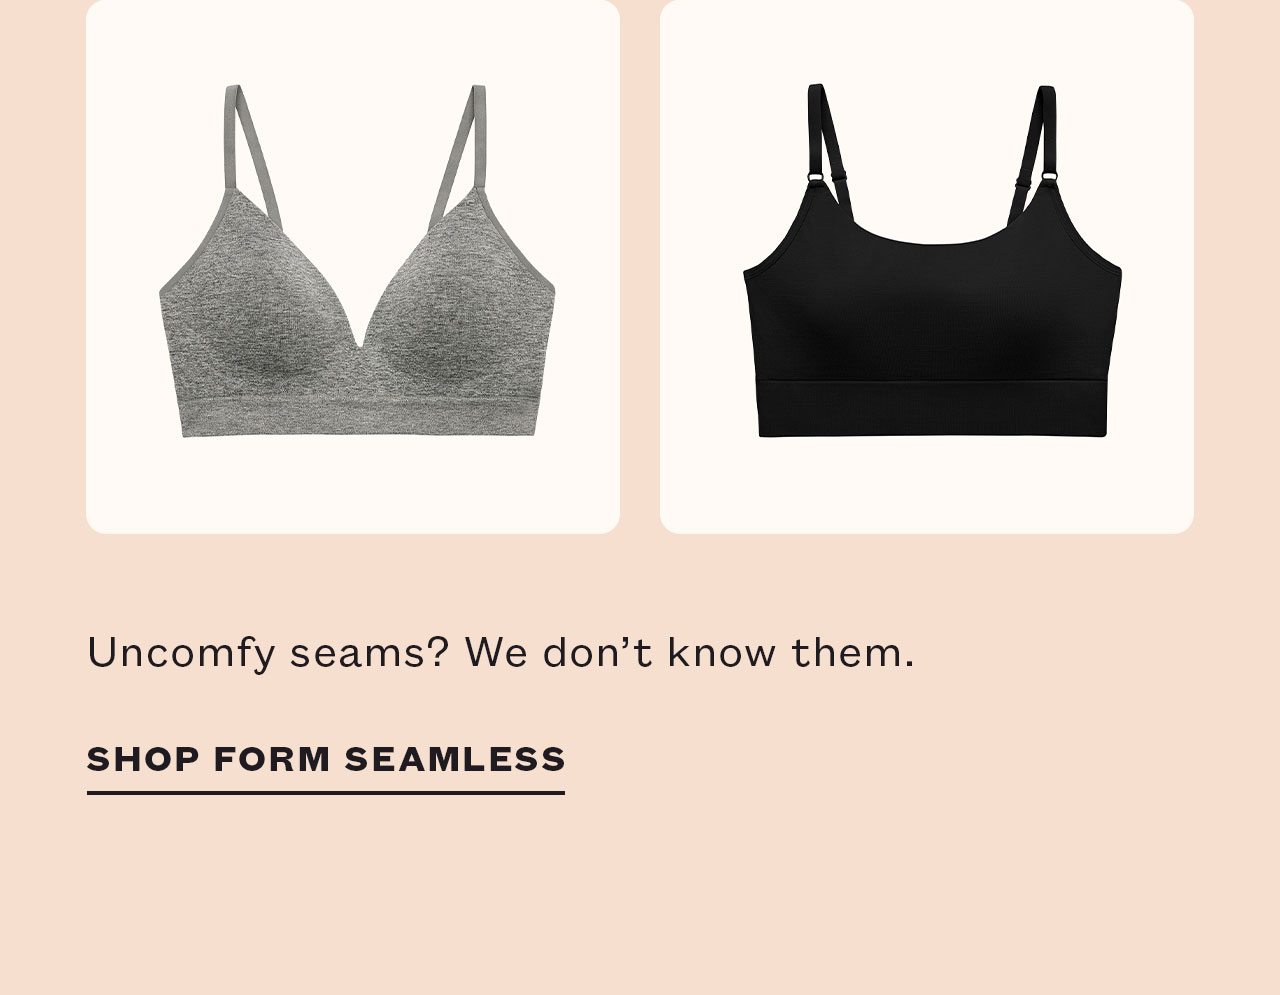 Uncomfy seams? We don't know them.